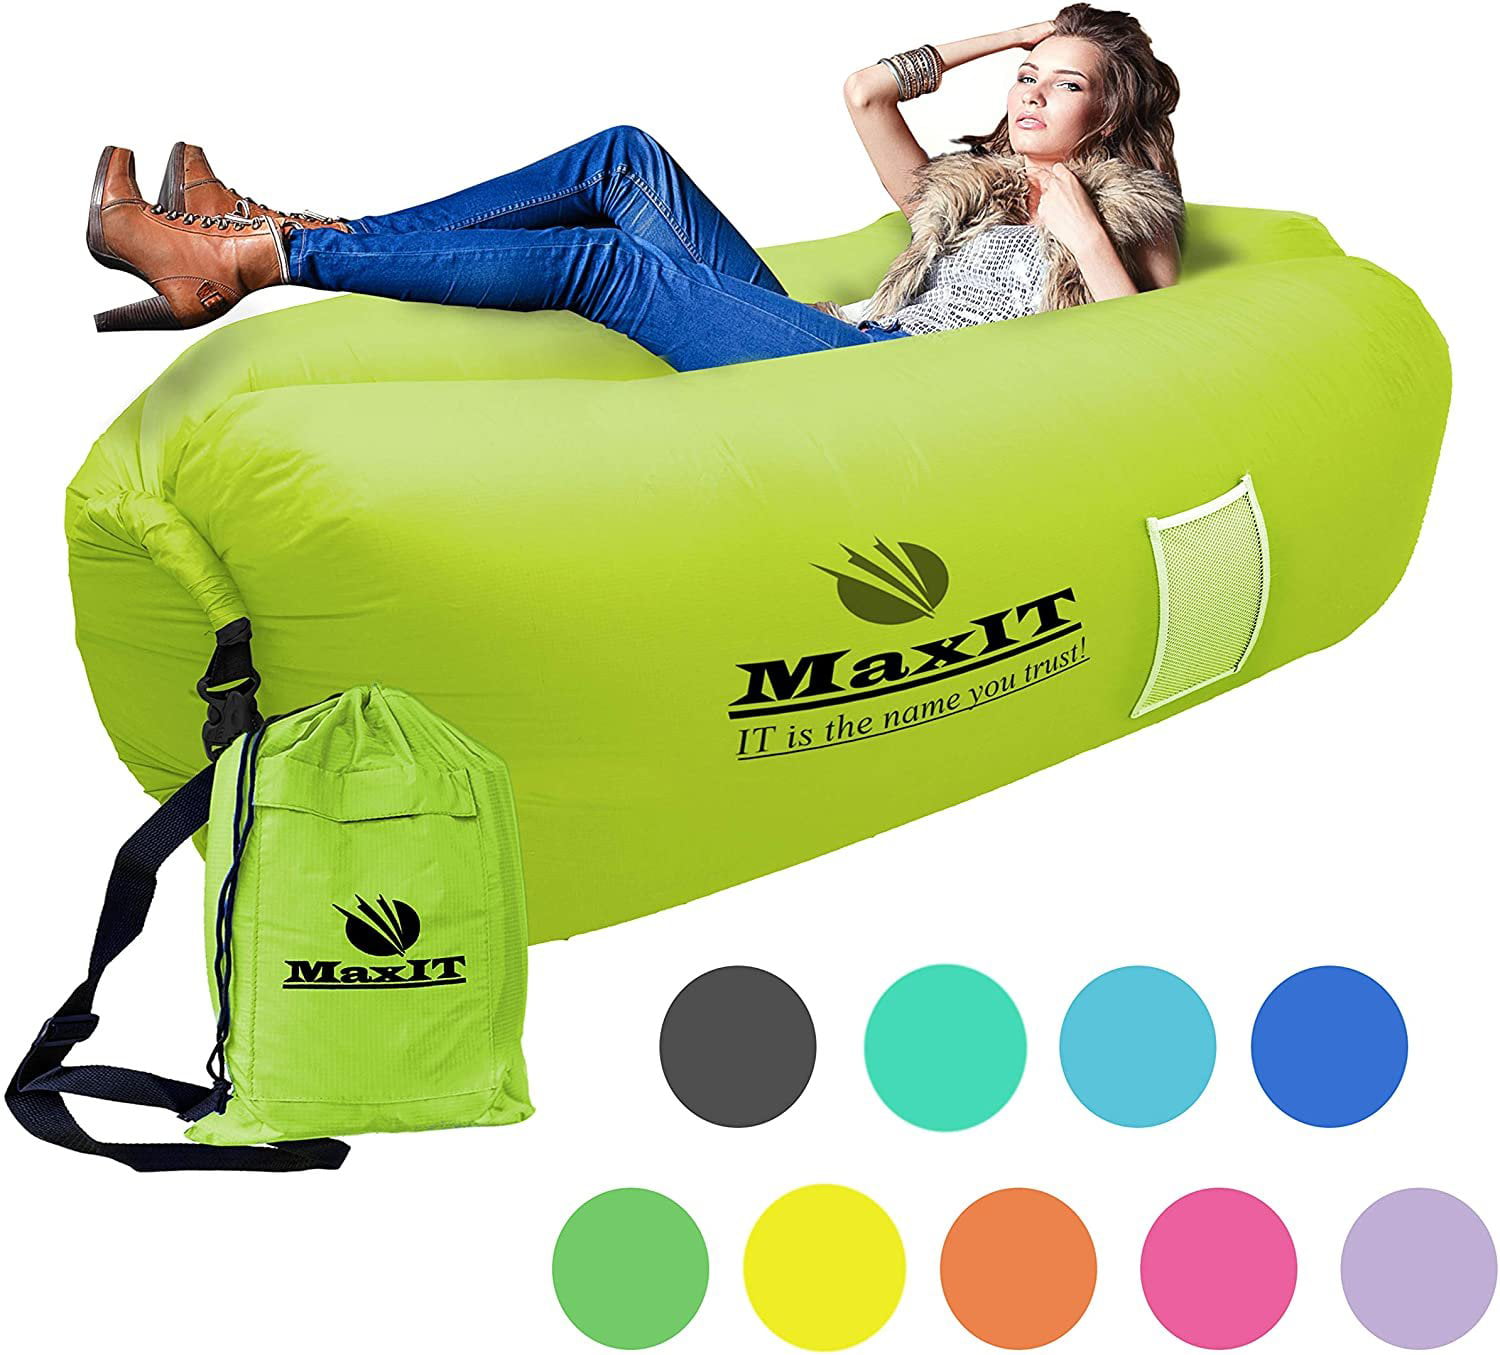 Details about   Instant Inflatable Lounger Portable Air Sofa Hammock Sleeping Bag No-Pump 